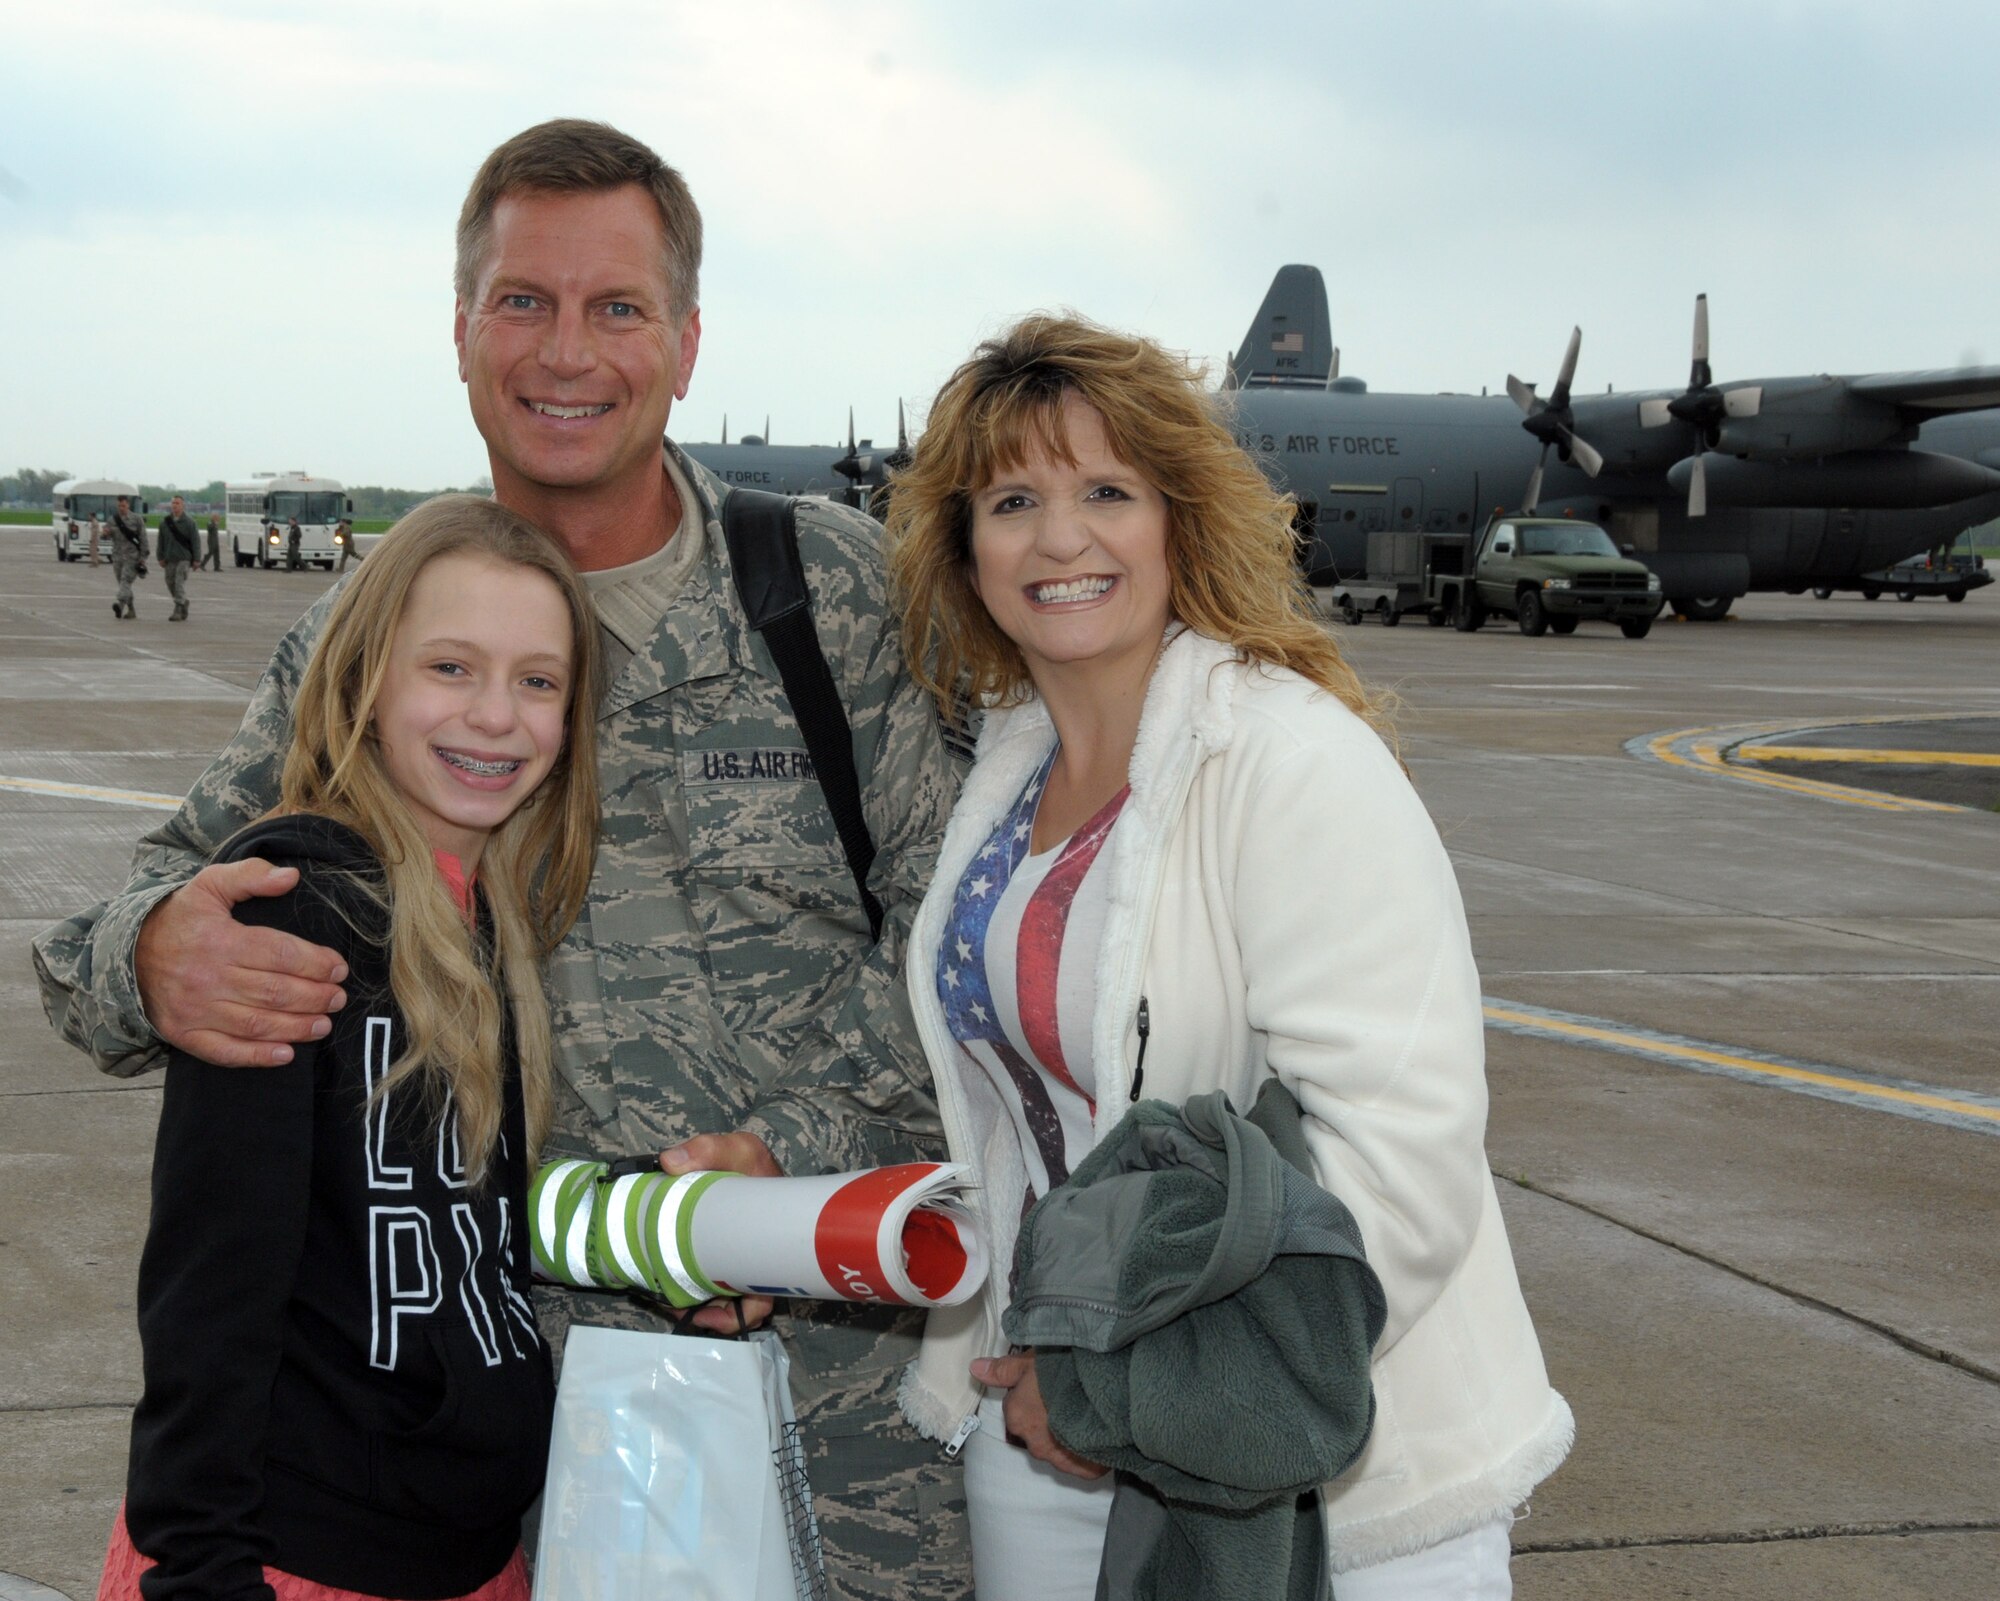 A 914th unit member is all smiles with his family by his side at the Niagara Falls Air Reserve Station, N.Y. May 19, 2014. More than 100 members were deployed overseas recently and have now returned home. (U.S. Air Force photo by Peter Borys)